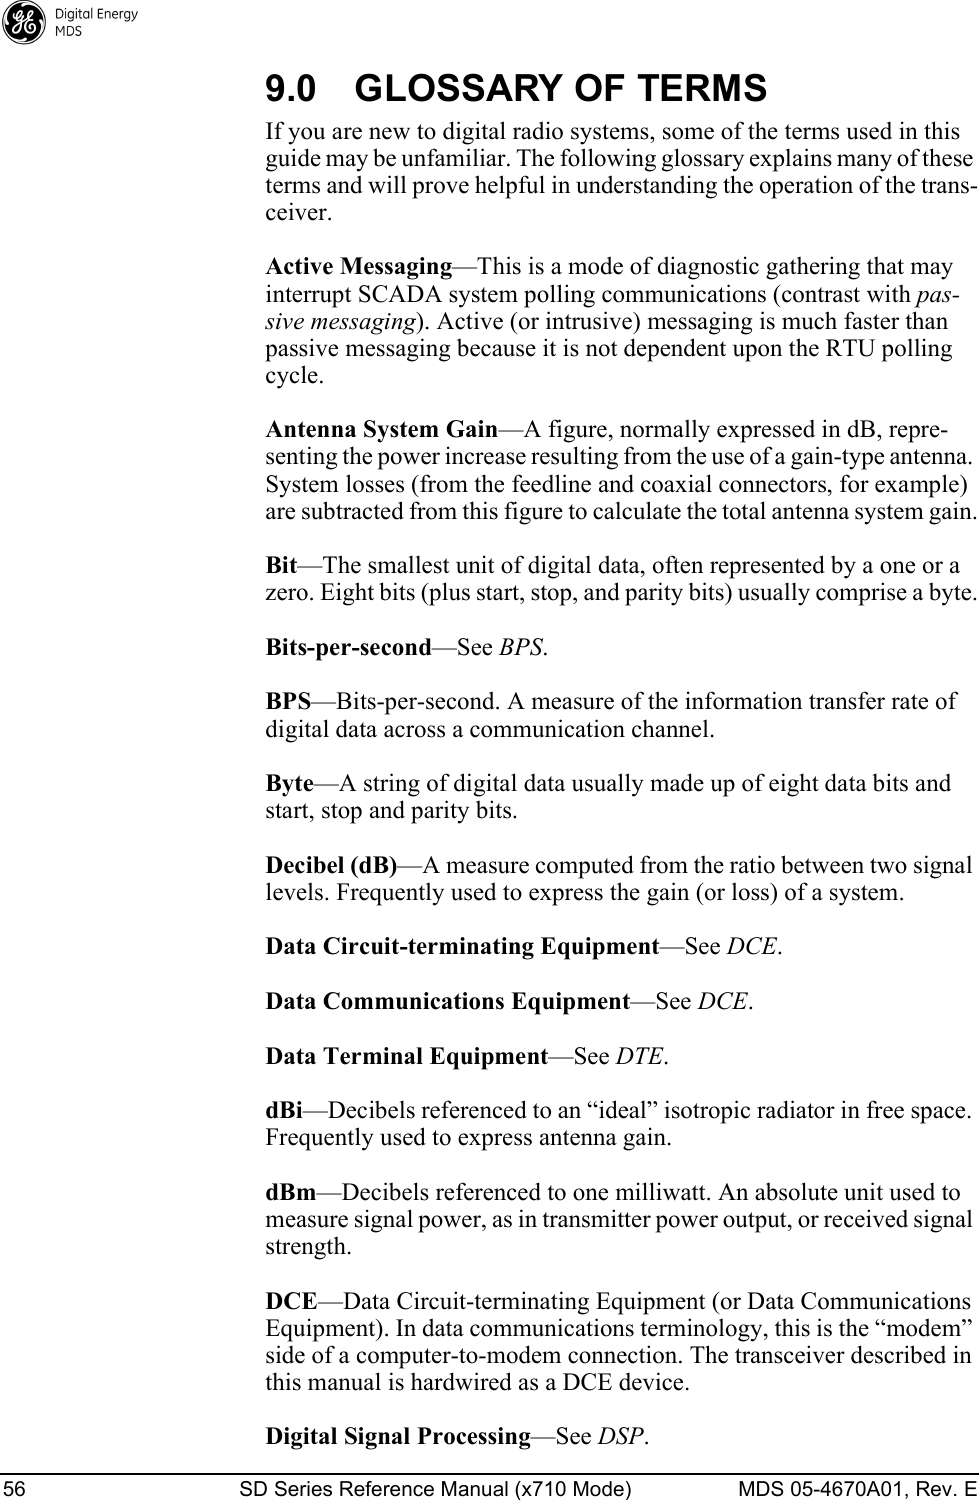 56 SD Series Reference Manual (x710 Mode) MDS 05-4670A01, Rev. E 9.0 GLOSSARY OF TERMSIf you are new to digital radio systems, some of the terms used in this guide may be unfamiliar. The following glossary explains many of these terms and will prove helpful in understanding the operation of the trans-ceiver.Active Messaging—This is a mode of diagnostic gathering that may interrupt SCADA system polling communications (contrast with pas-sive messaging). Active (or intrusive) messaging is much faster than passive messaging because it is not dependent upon the RTU polling cycle.Antenna System Gain—A figure, normally expressed in dB, repre-senting the power increase resulting from the use of a gain-type antenna. System losses (from the feedline and coaxial connectors, for example) are subtracted from this figure to calculate the total antenna system gain.Bit—The smallest unit of digital data, often represented by a one or a zero. Eight bits (plus start, stop, and parity bits) usually comprise a byte.Bits-per-second—See BPS.BPS—Bits-per-second. A measure of the information transfer rate of digital data across a communication channel.Byte—A string of digital data usually made up of eight data bits and start, stop and parity bits.Decibel (dB)—A measure computed from the ratio between two signal levels. Frequently used to express the gain (or loss) of a system.Data Circuit-terminating Equipment—See DCE.Data Communications Equipment—See DCE.Data Terminal Equipment—See DTE.dBi—Decibels referenced to an “ideal” isotropic radiator in free space. Frequently used to express antenna gain.dBm—Decibels referenced to one milliwatt. An absolute unit used to measure signal power, as in transmitter power output, or received signal strength.DCE—Data Circuit-terminating Equipment (or Data Communications Equipment). In data communications terminology, this is the “modem” side of a computer-to-modem connection. The transceiver described in this manual is hardwired as a DCE device.Digital Signal Processing—See DSP.